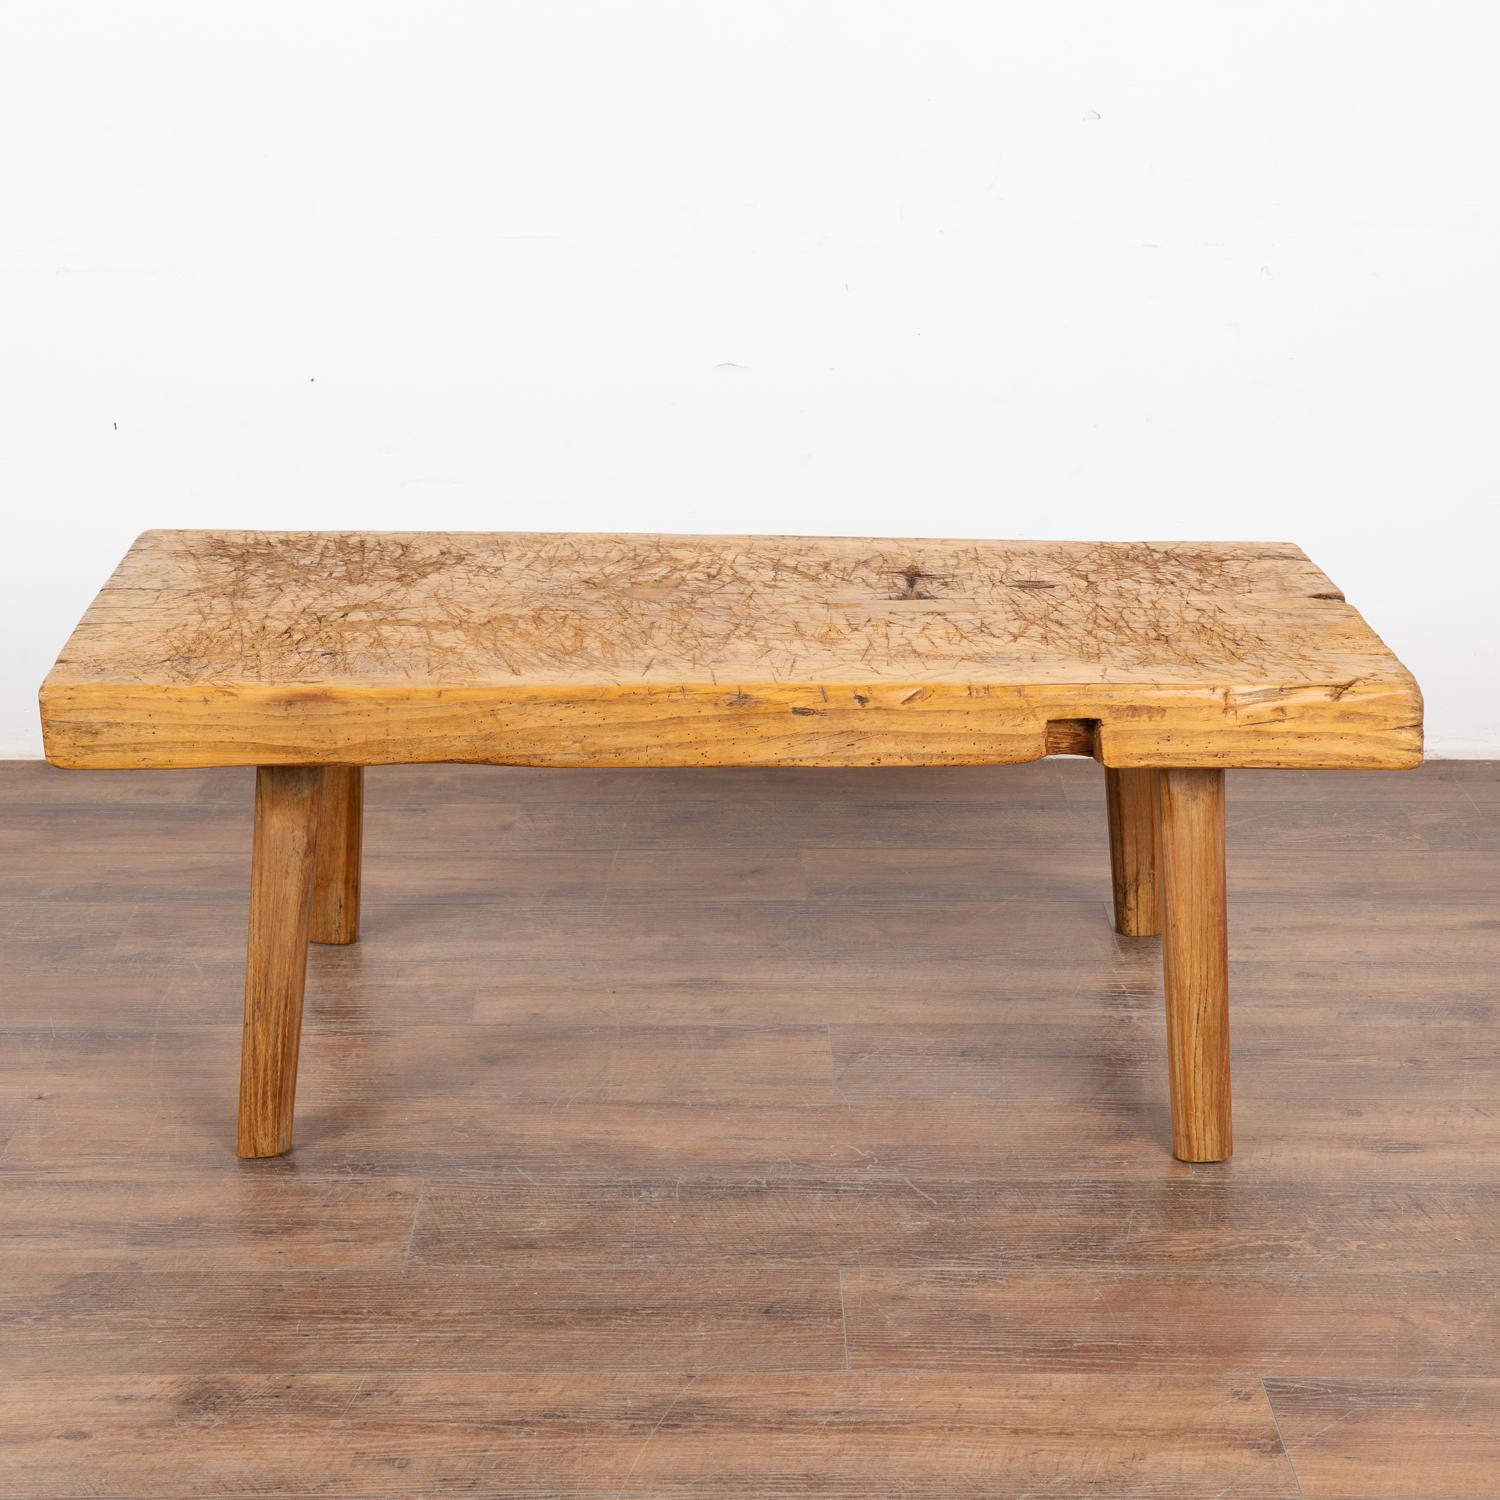 Hungarian Rustic Coffee Table from Hungary, circa 1890 For Sale